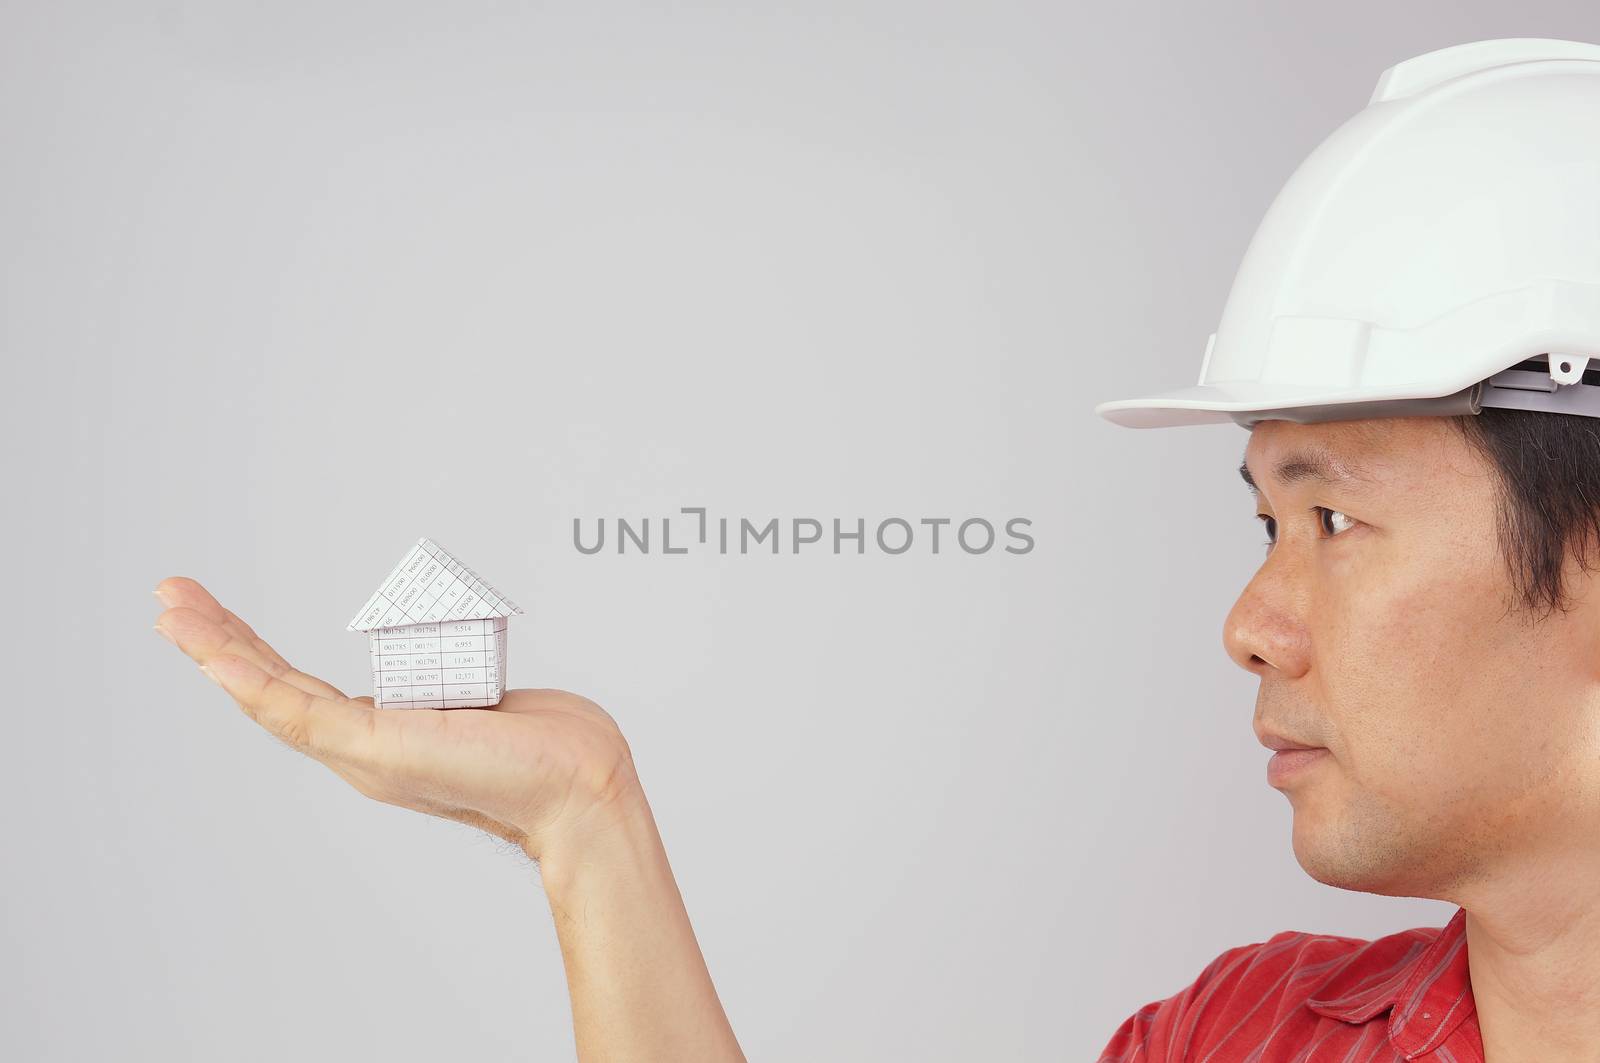 Engineer wear red shirt and white engineer hat is looking at house on hand with white background.